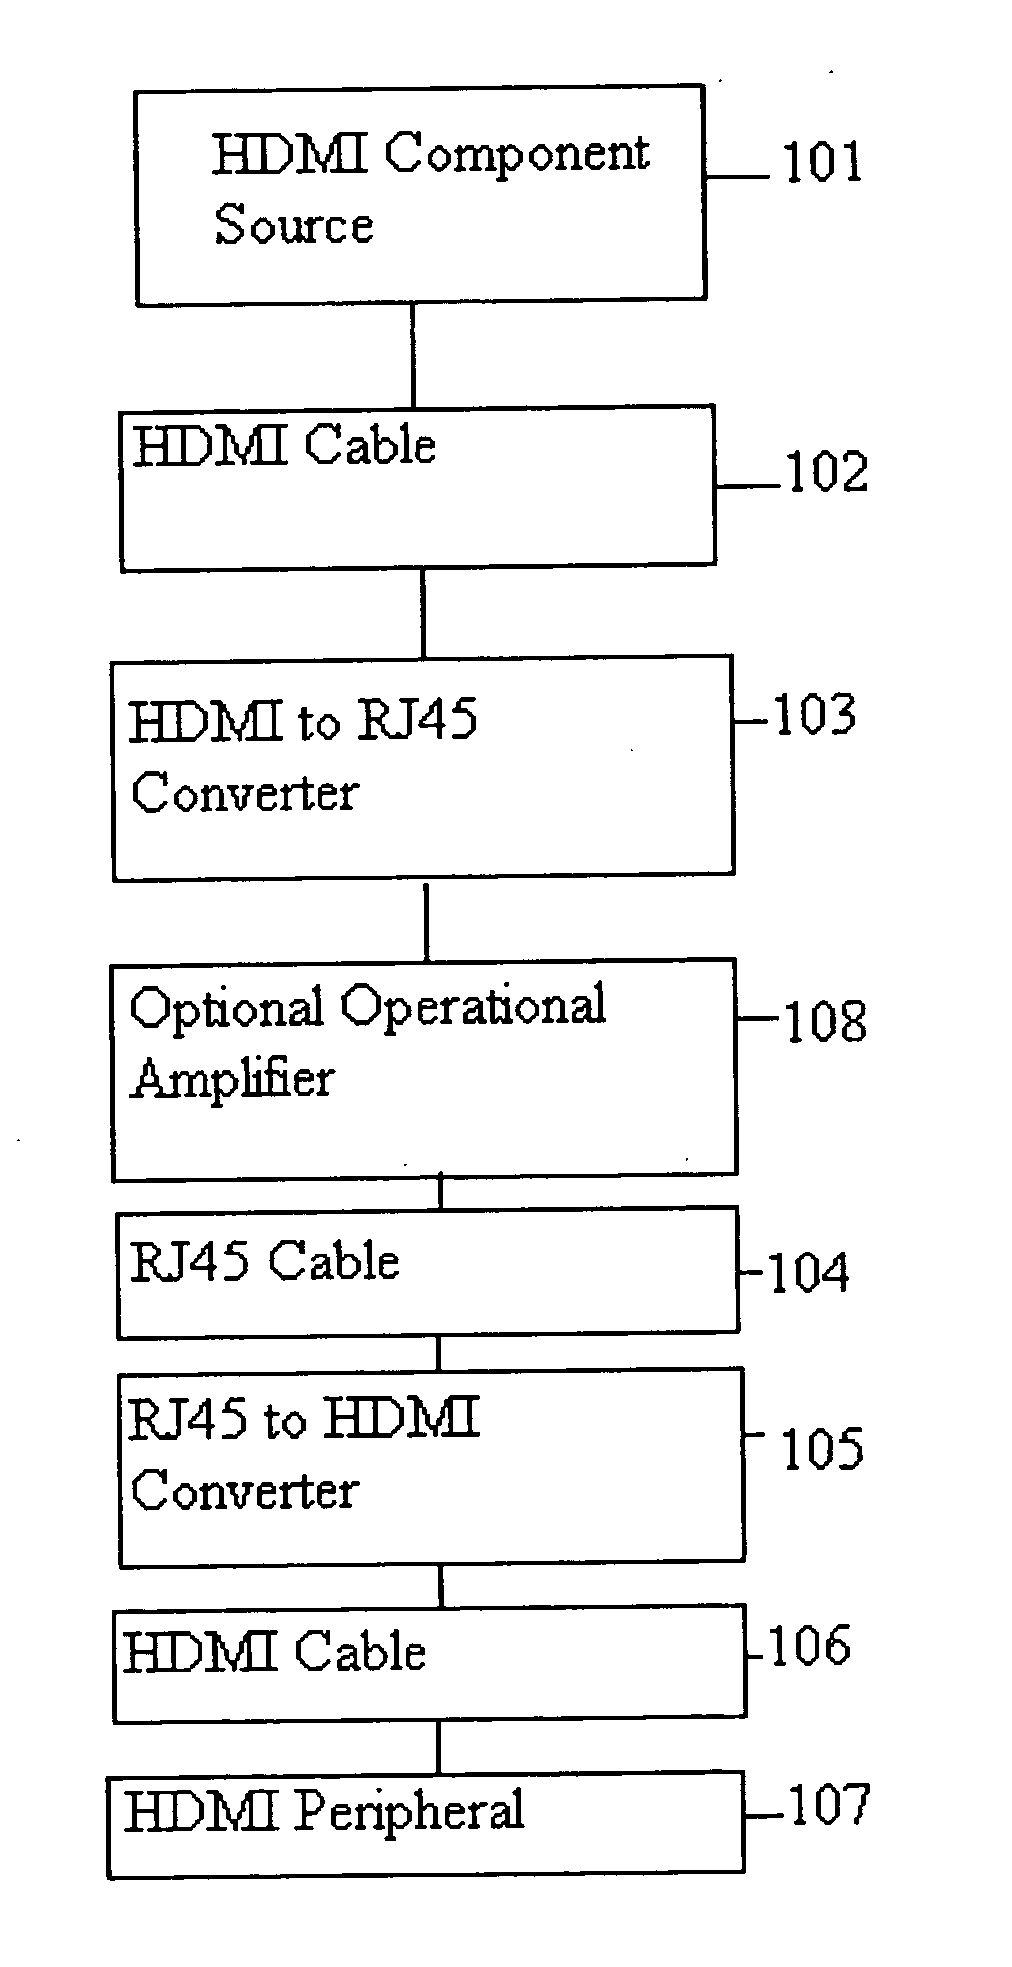 HDMI cable interface